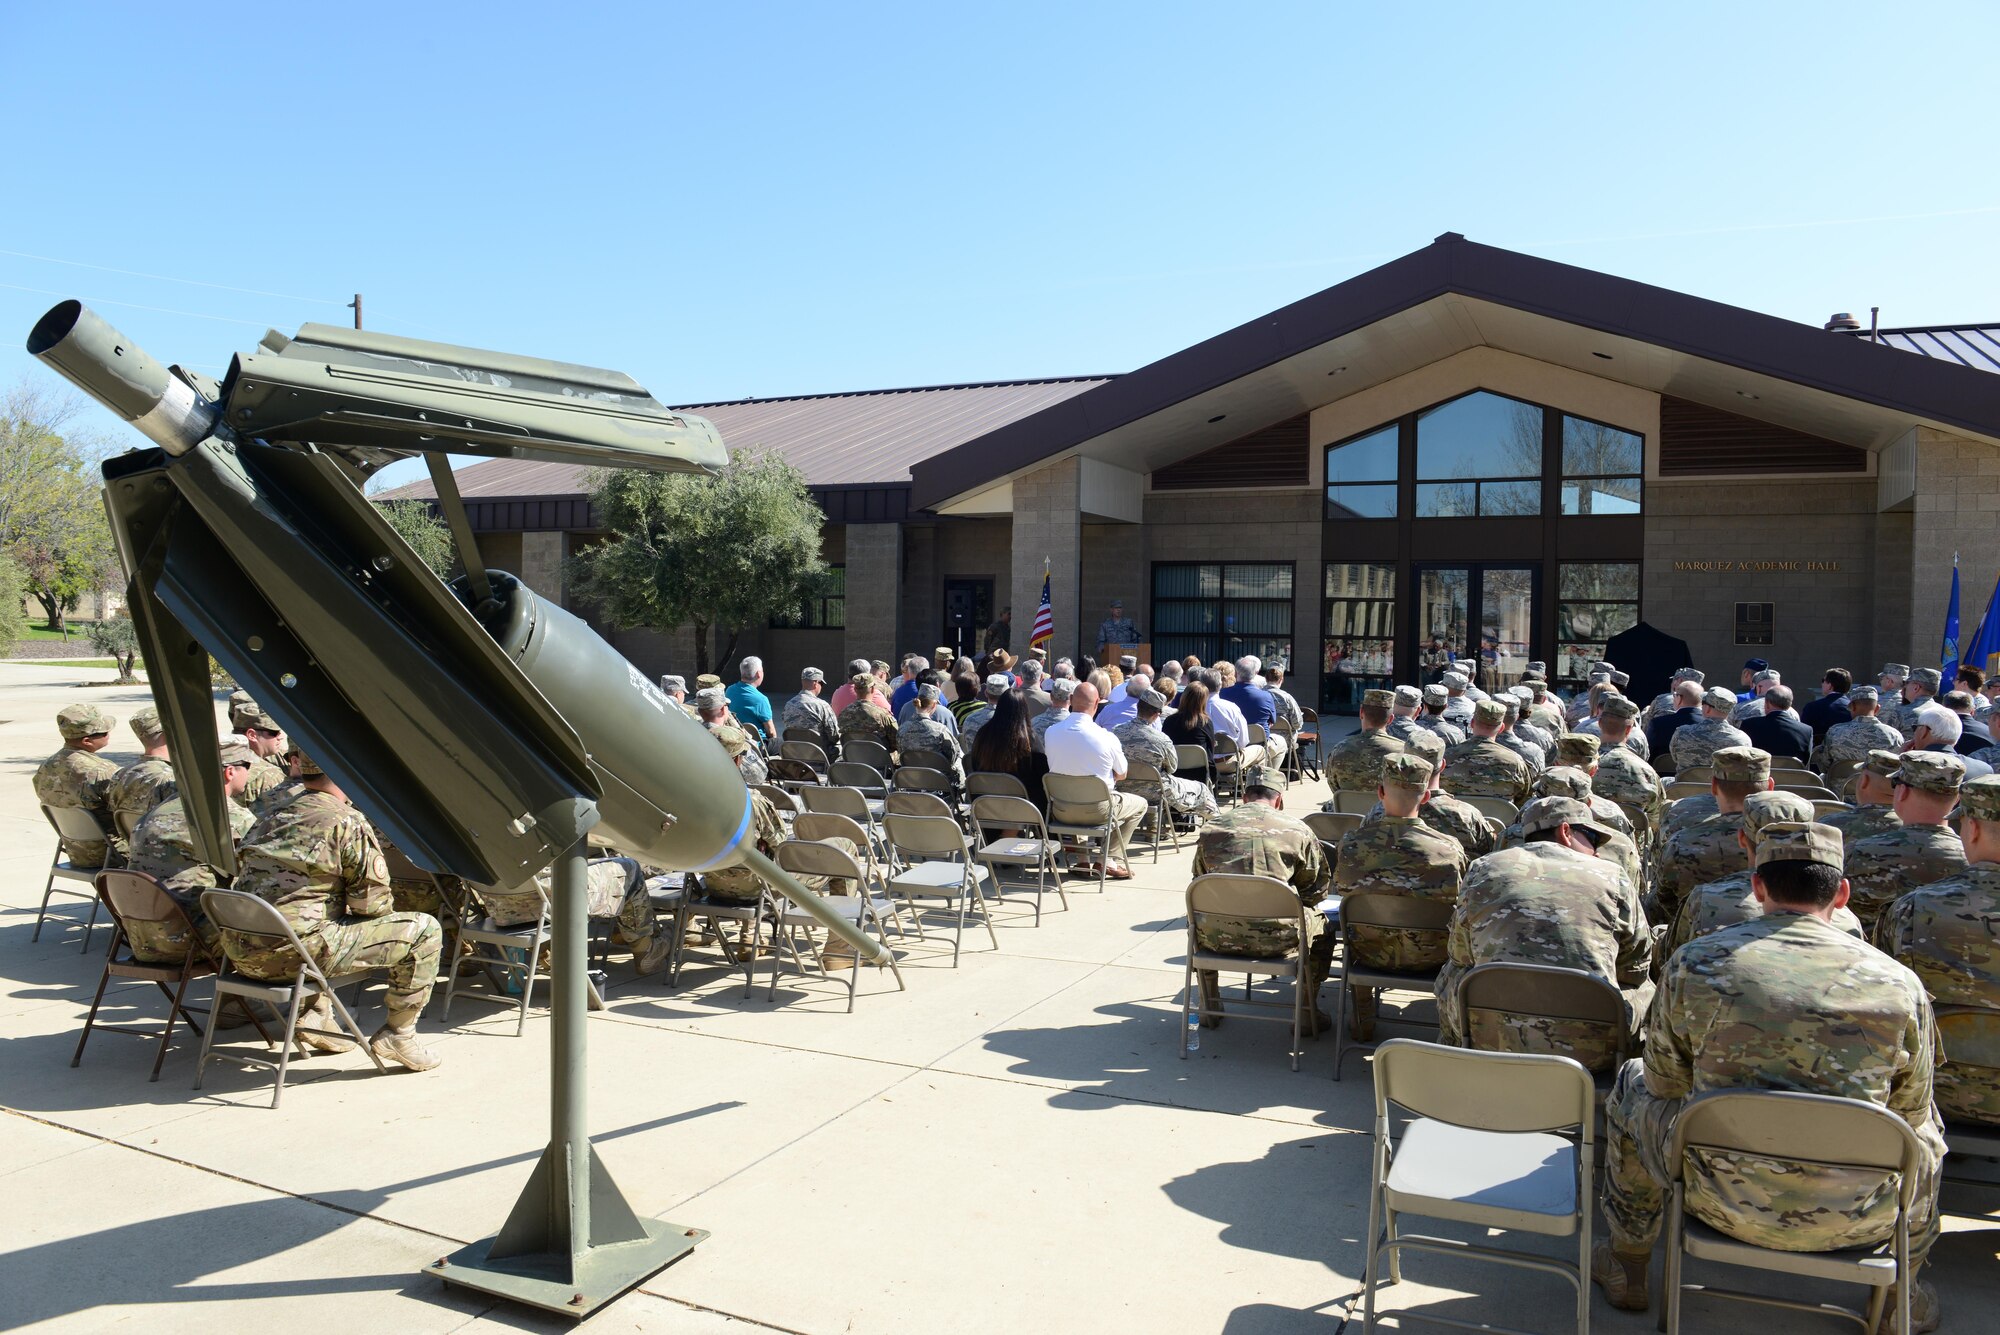 The 9th Munitions Squadron hosts a ceremony March 18, 2016, at Beale Air Force Base, California, celebrating the 30th Anniversary of the Air Force Combat Ammunition Center (AFCOMAC). The event was attended by past and present AFCOMAC Airmen including the first “AMMO Chief” Chief Master Sgt. retired Van D. Ray. (U.S. Air Force photo by Senior Airman Bobby Cummings)